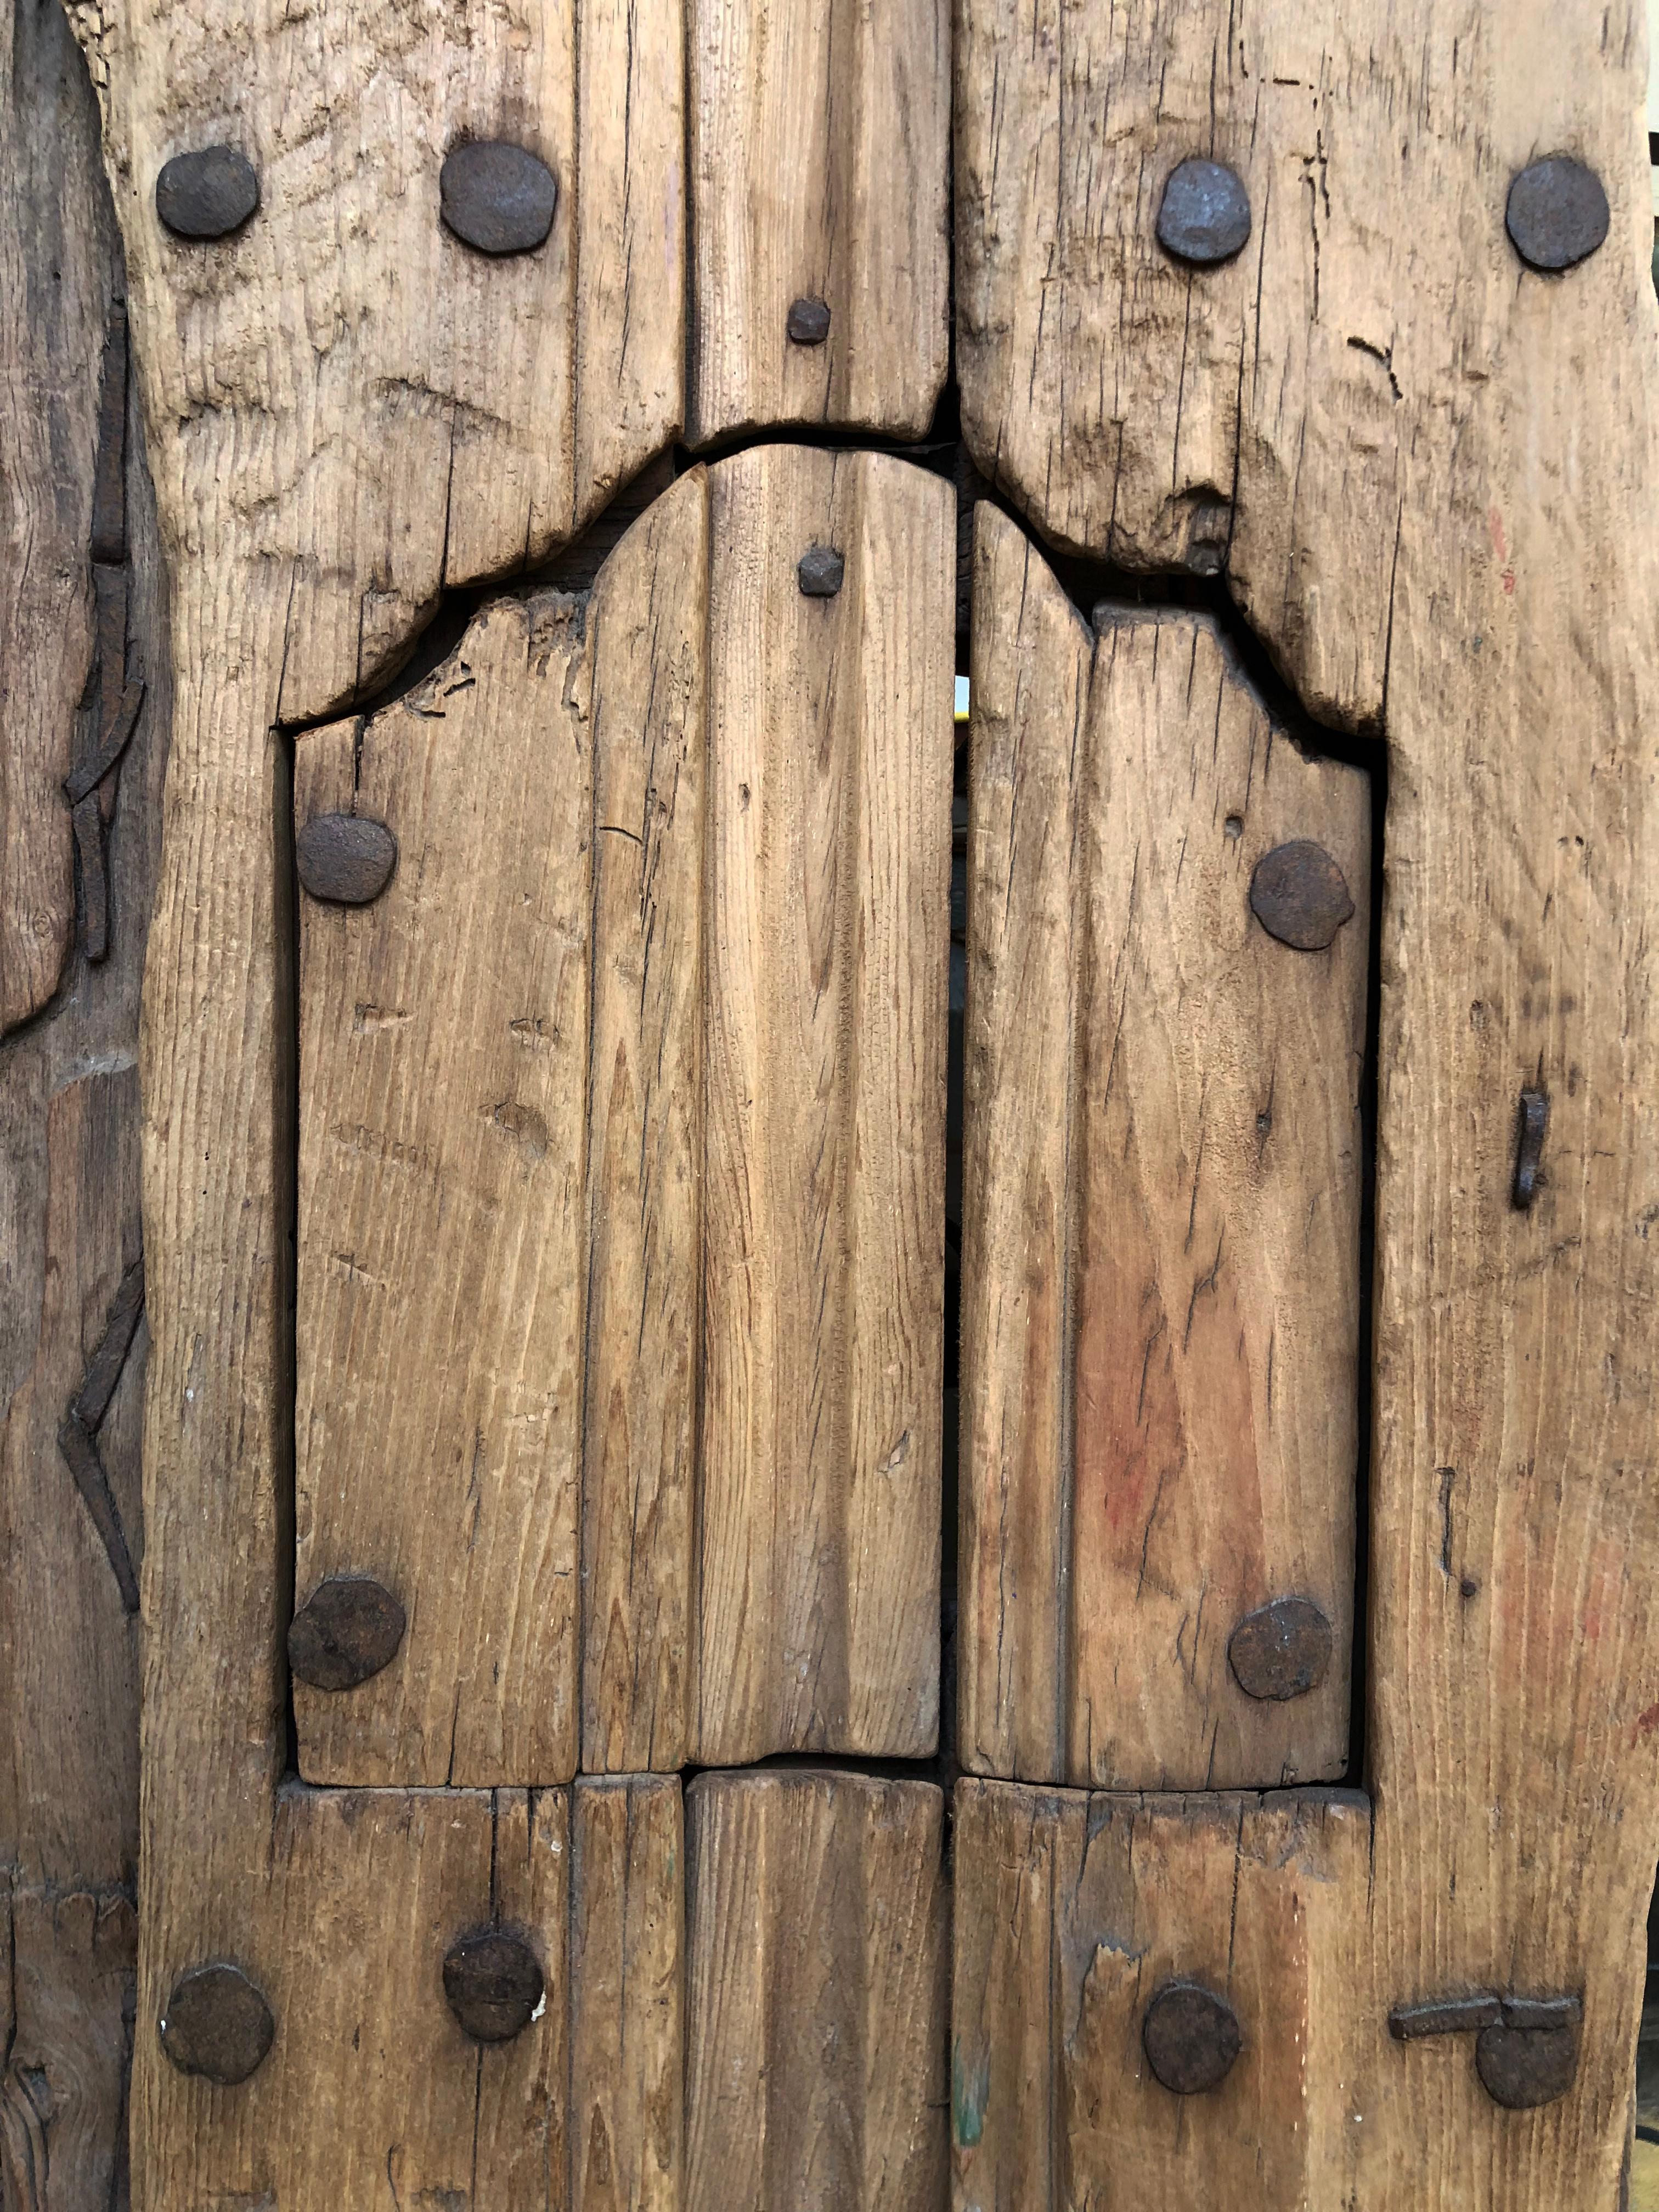 This beautiful piece is part of a bigger door, it was made with Sabino wood and has forging ironwork nails, this type of wood gets an amazing patina as the centuries pass. It has all the iron works intact, the type of hinge on this door are called